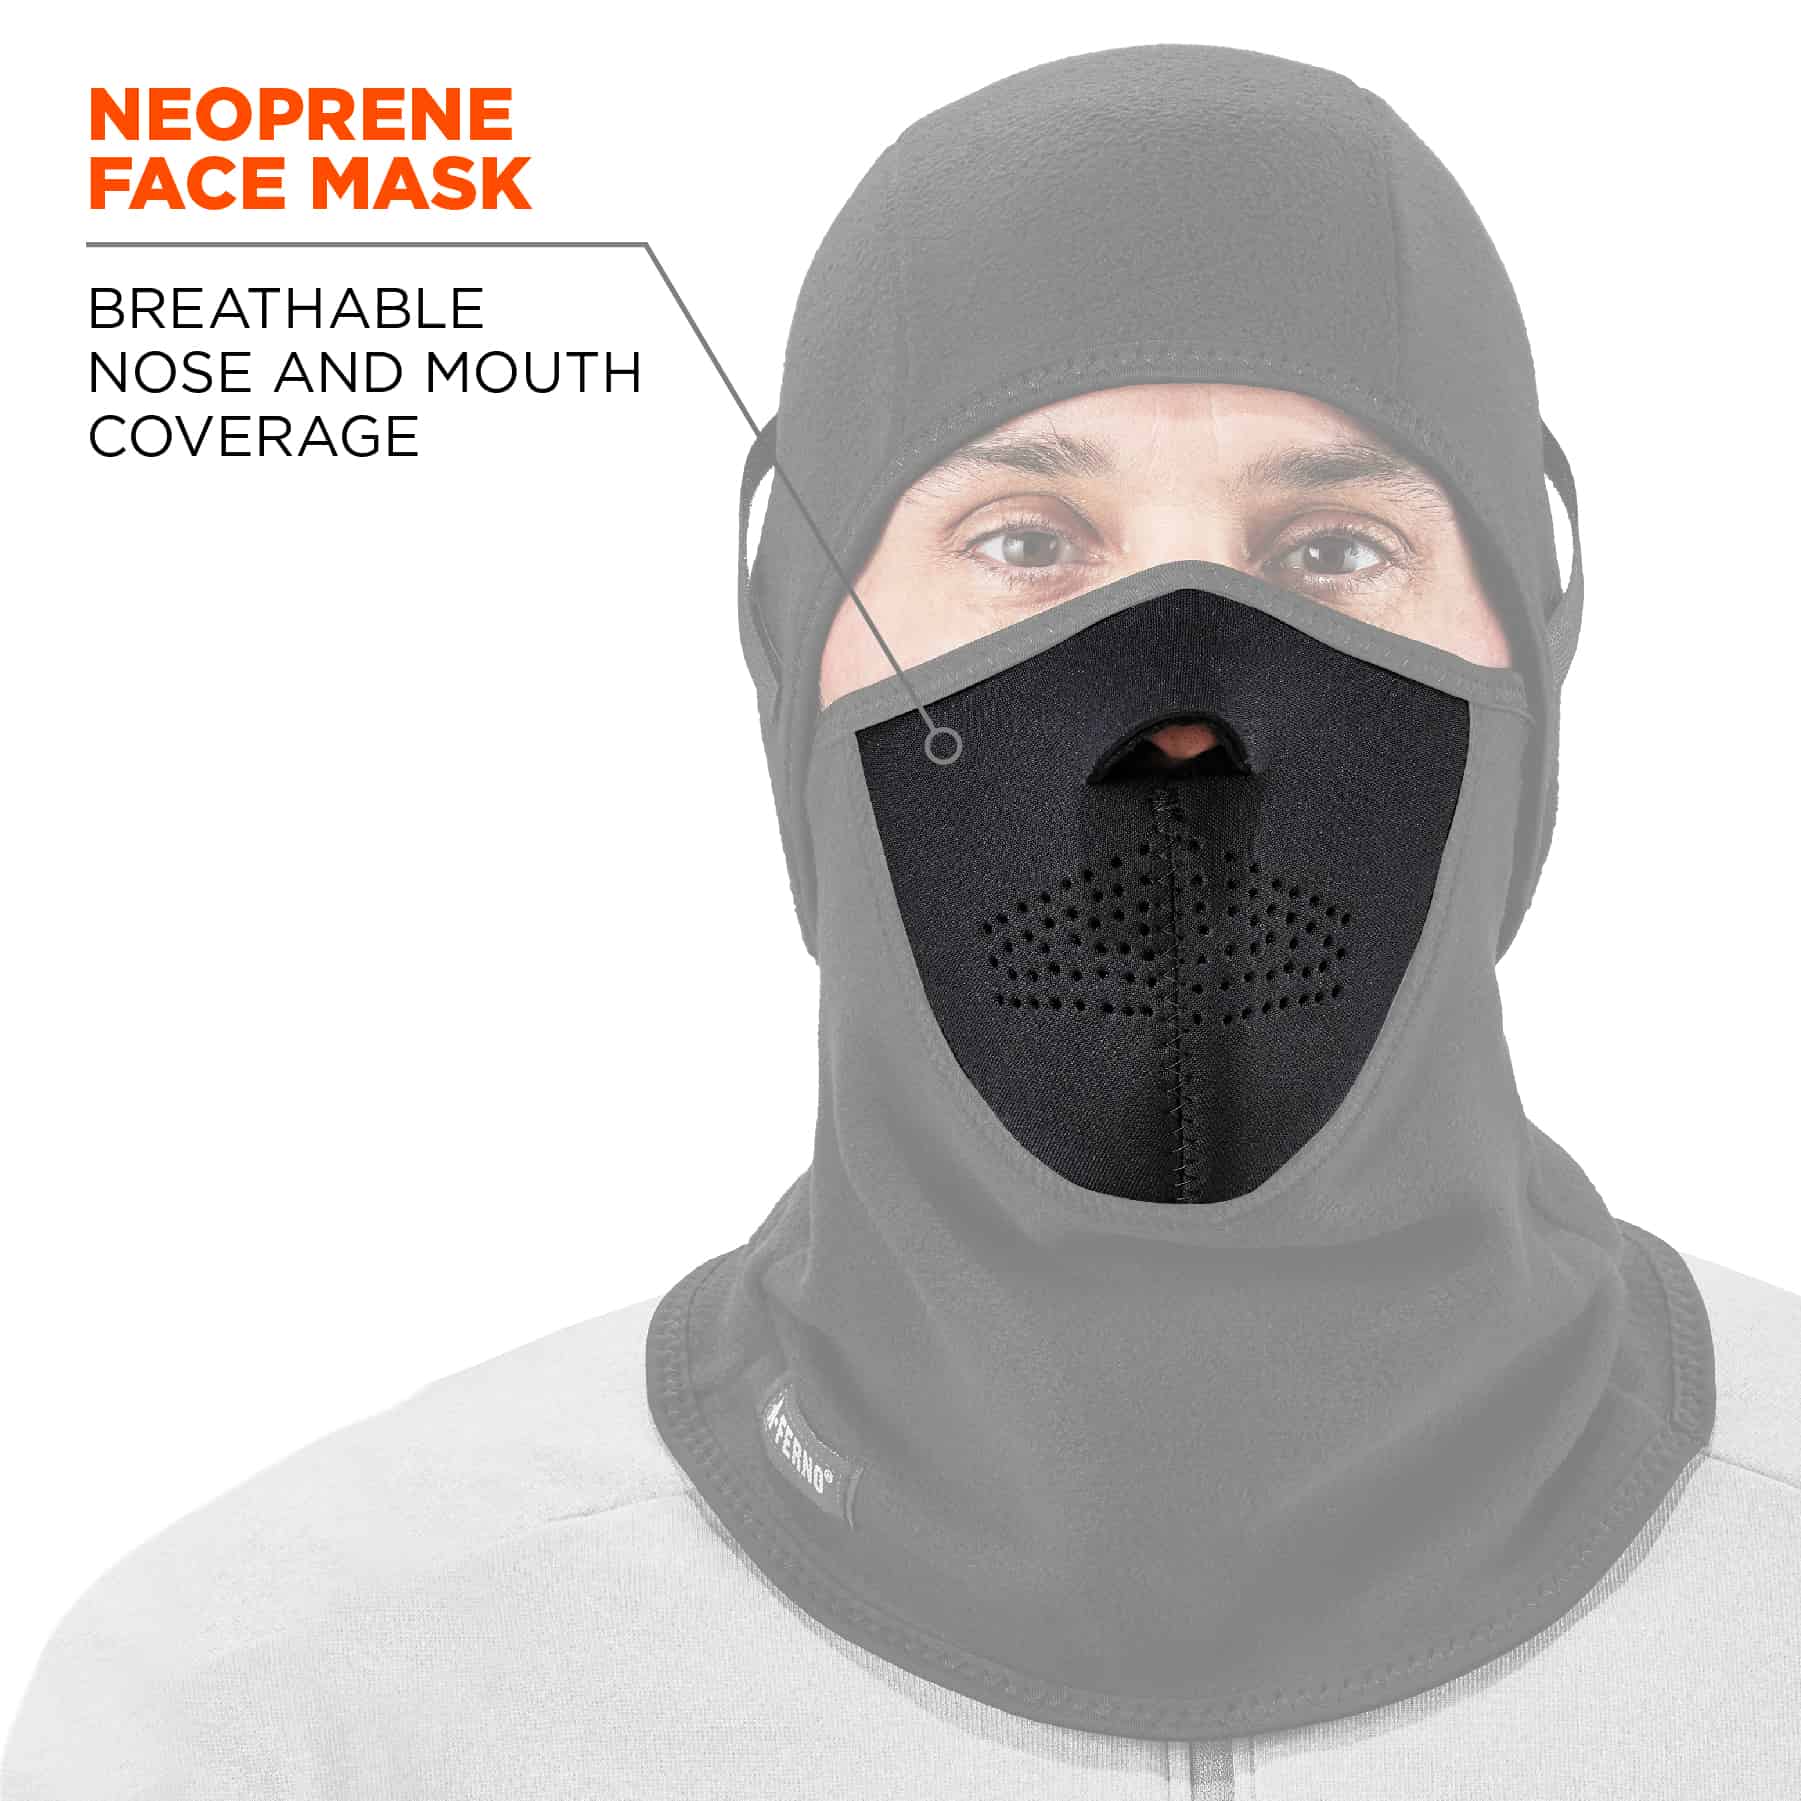 Fleece & Neoprene Face Mask by NOJ Gear USA Protect your face from cold & wind. 